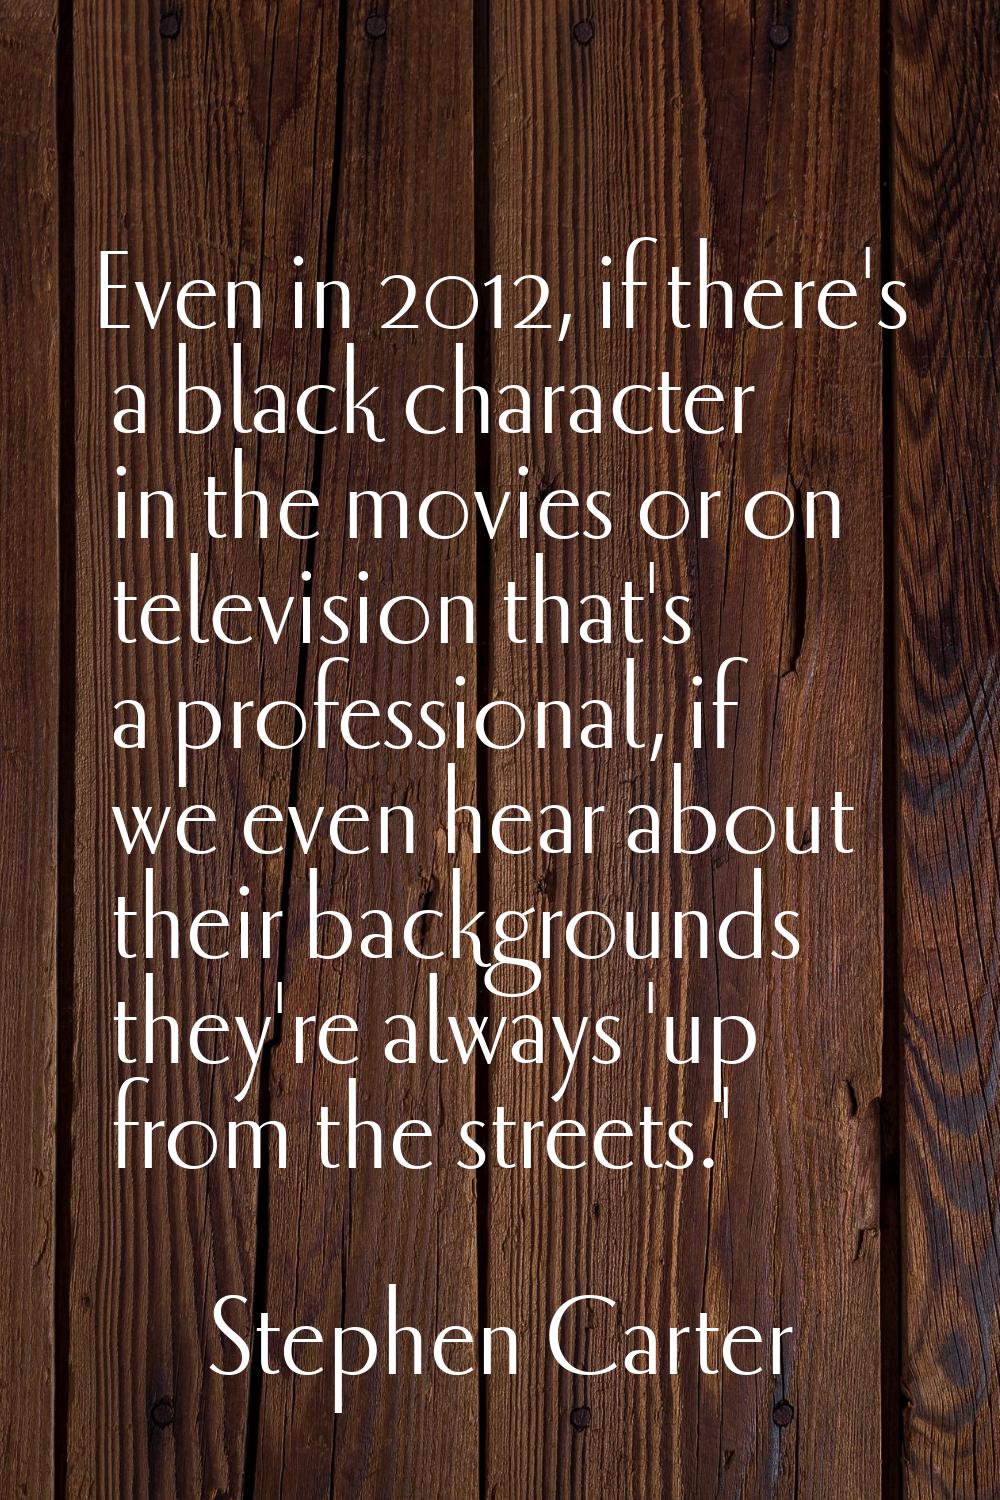 Even in 2012, if there's a black character in the movies or on television that's a professional, if